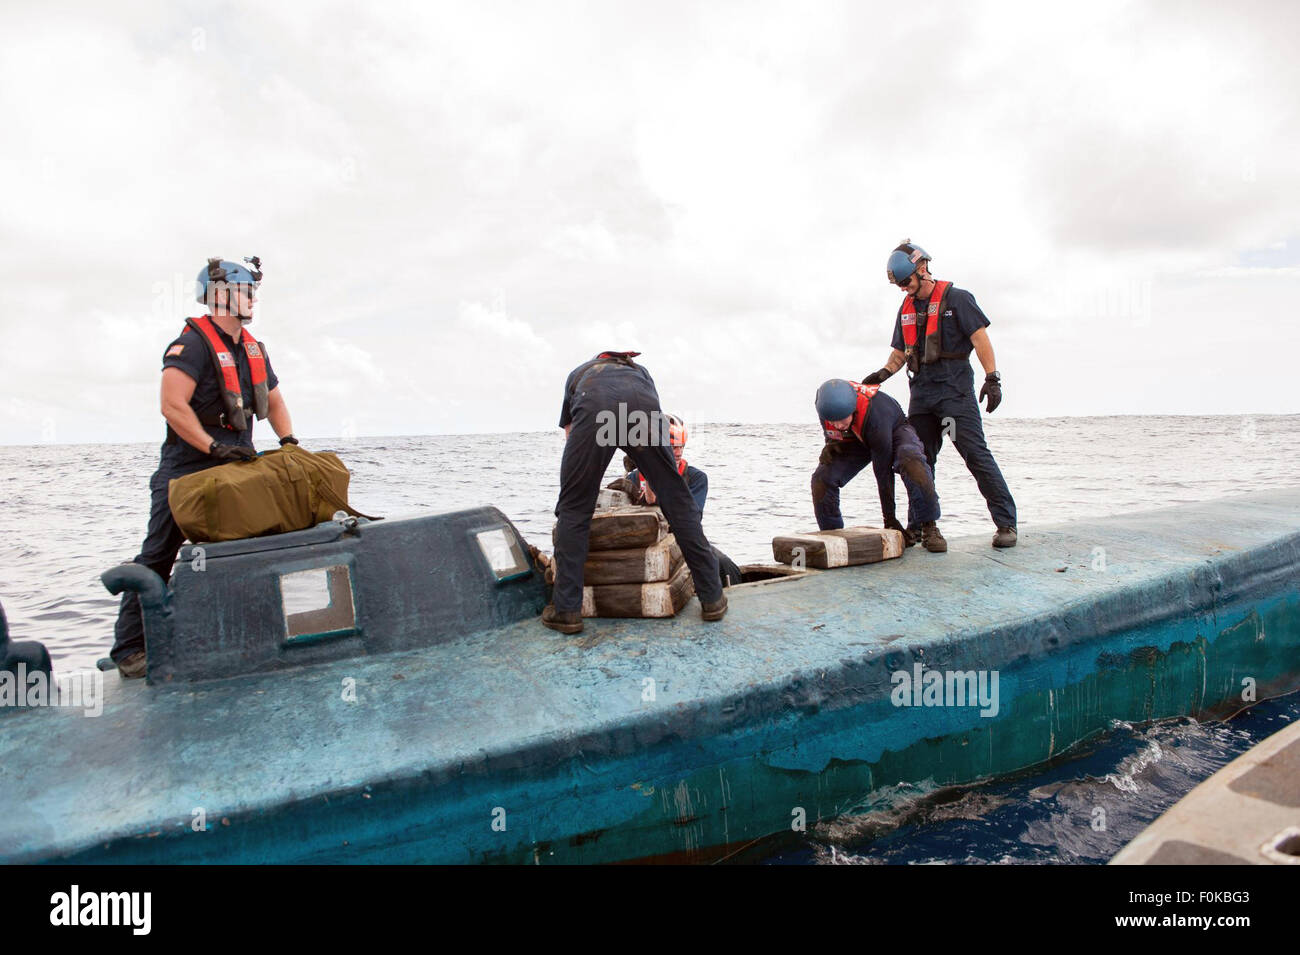 A US Coast Guard boarding team from the USCG Cutter Stratton removes bales of cocaine from a self-propelled semi-submersible submarine interdicted in international waters July 19, 2015 off the coast of Central America. Stock Photo